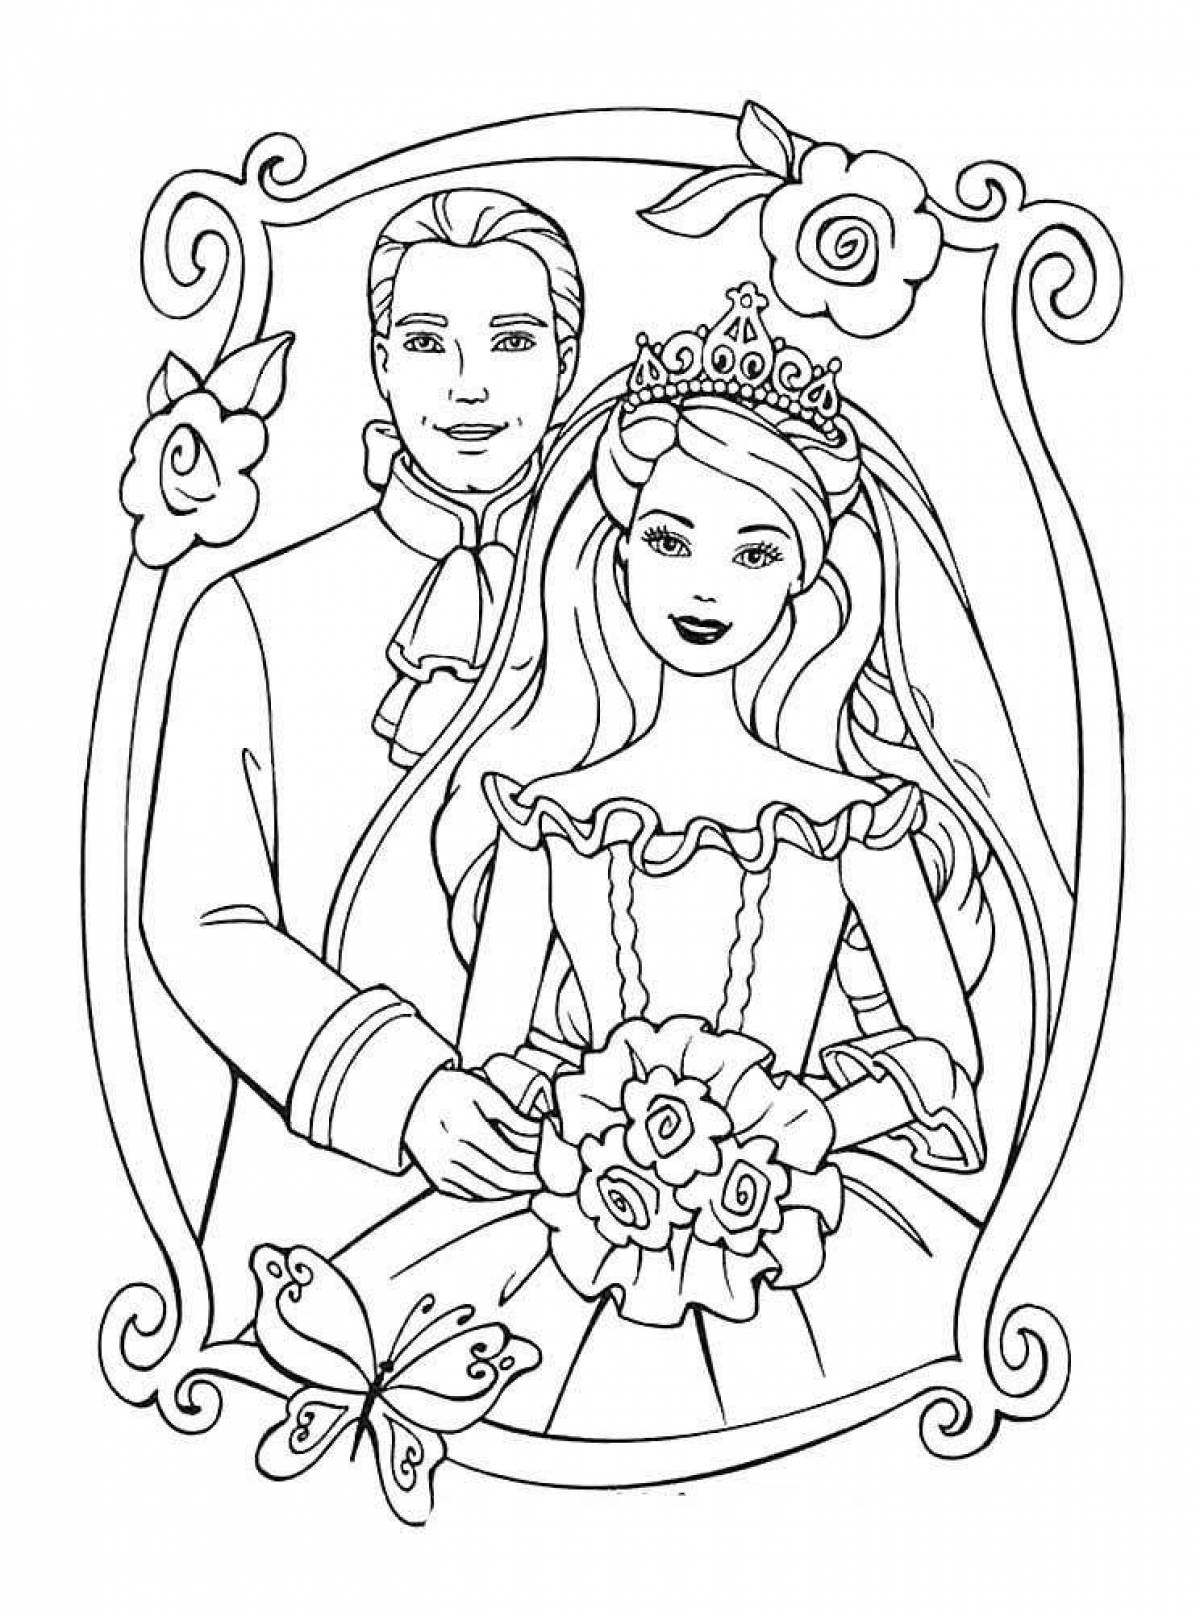 Dazzling prince and princess coloring book